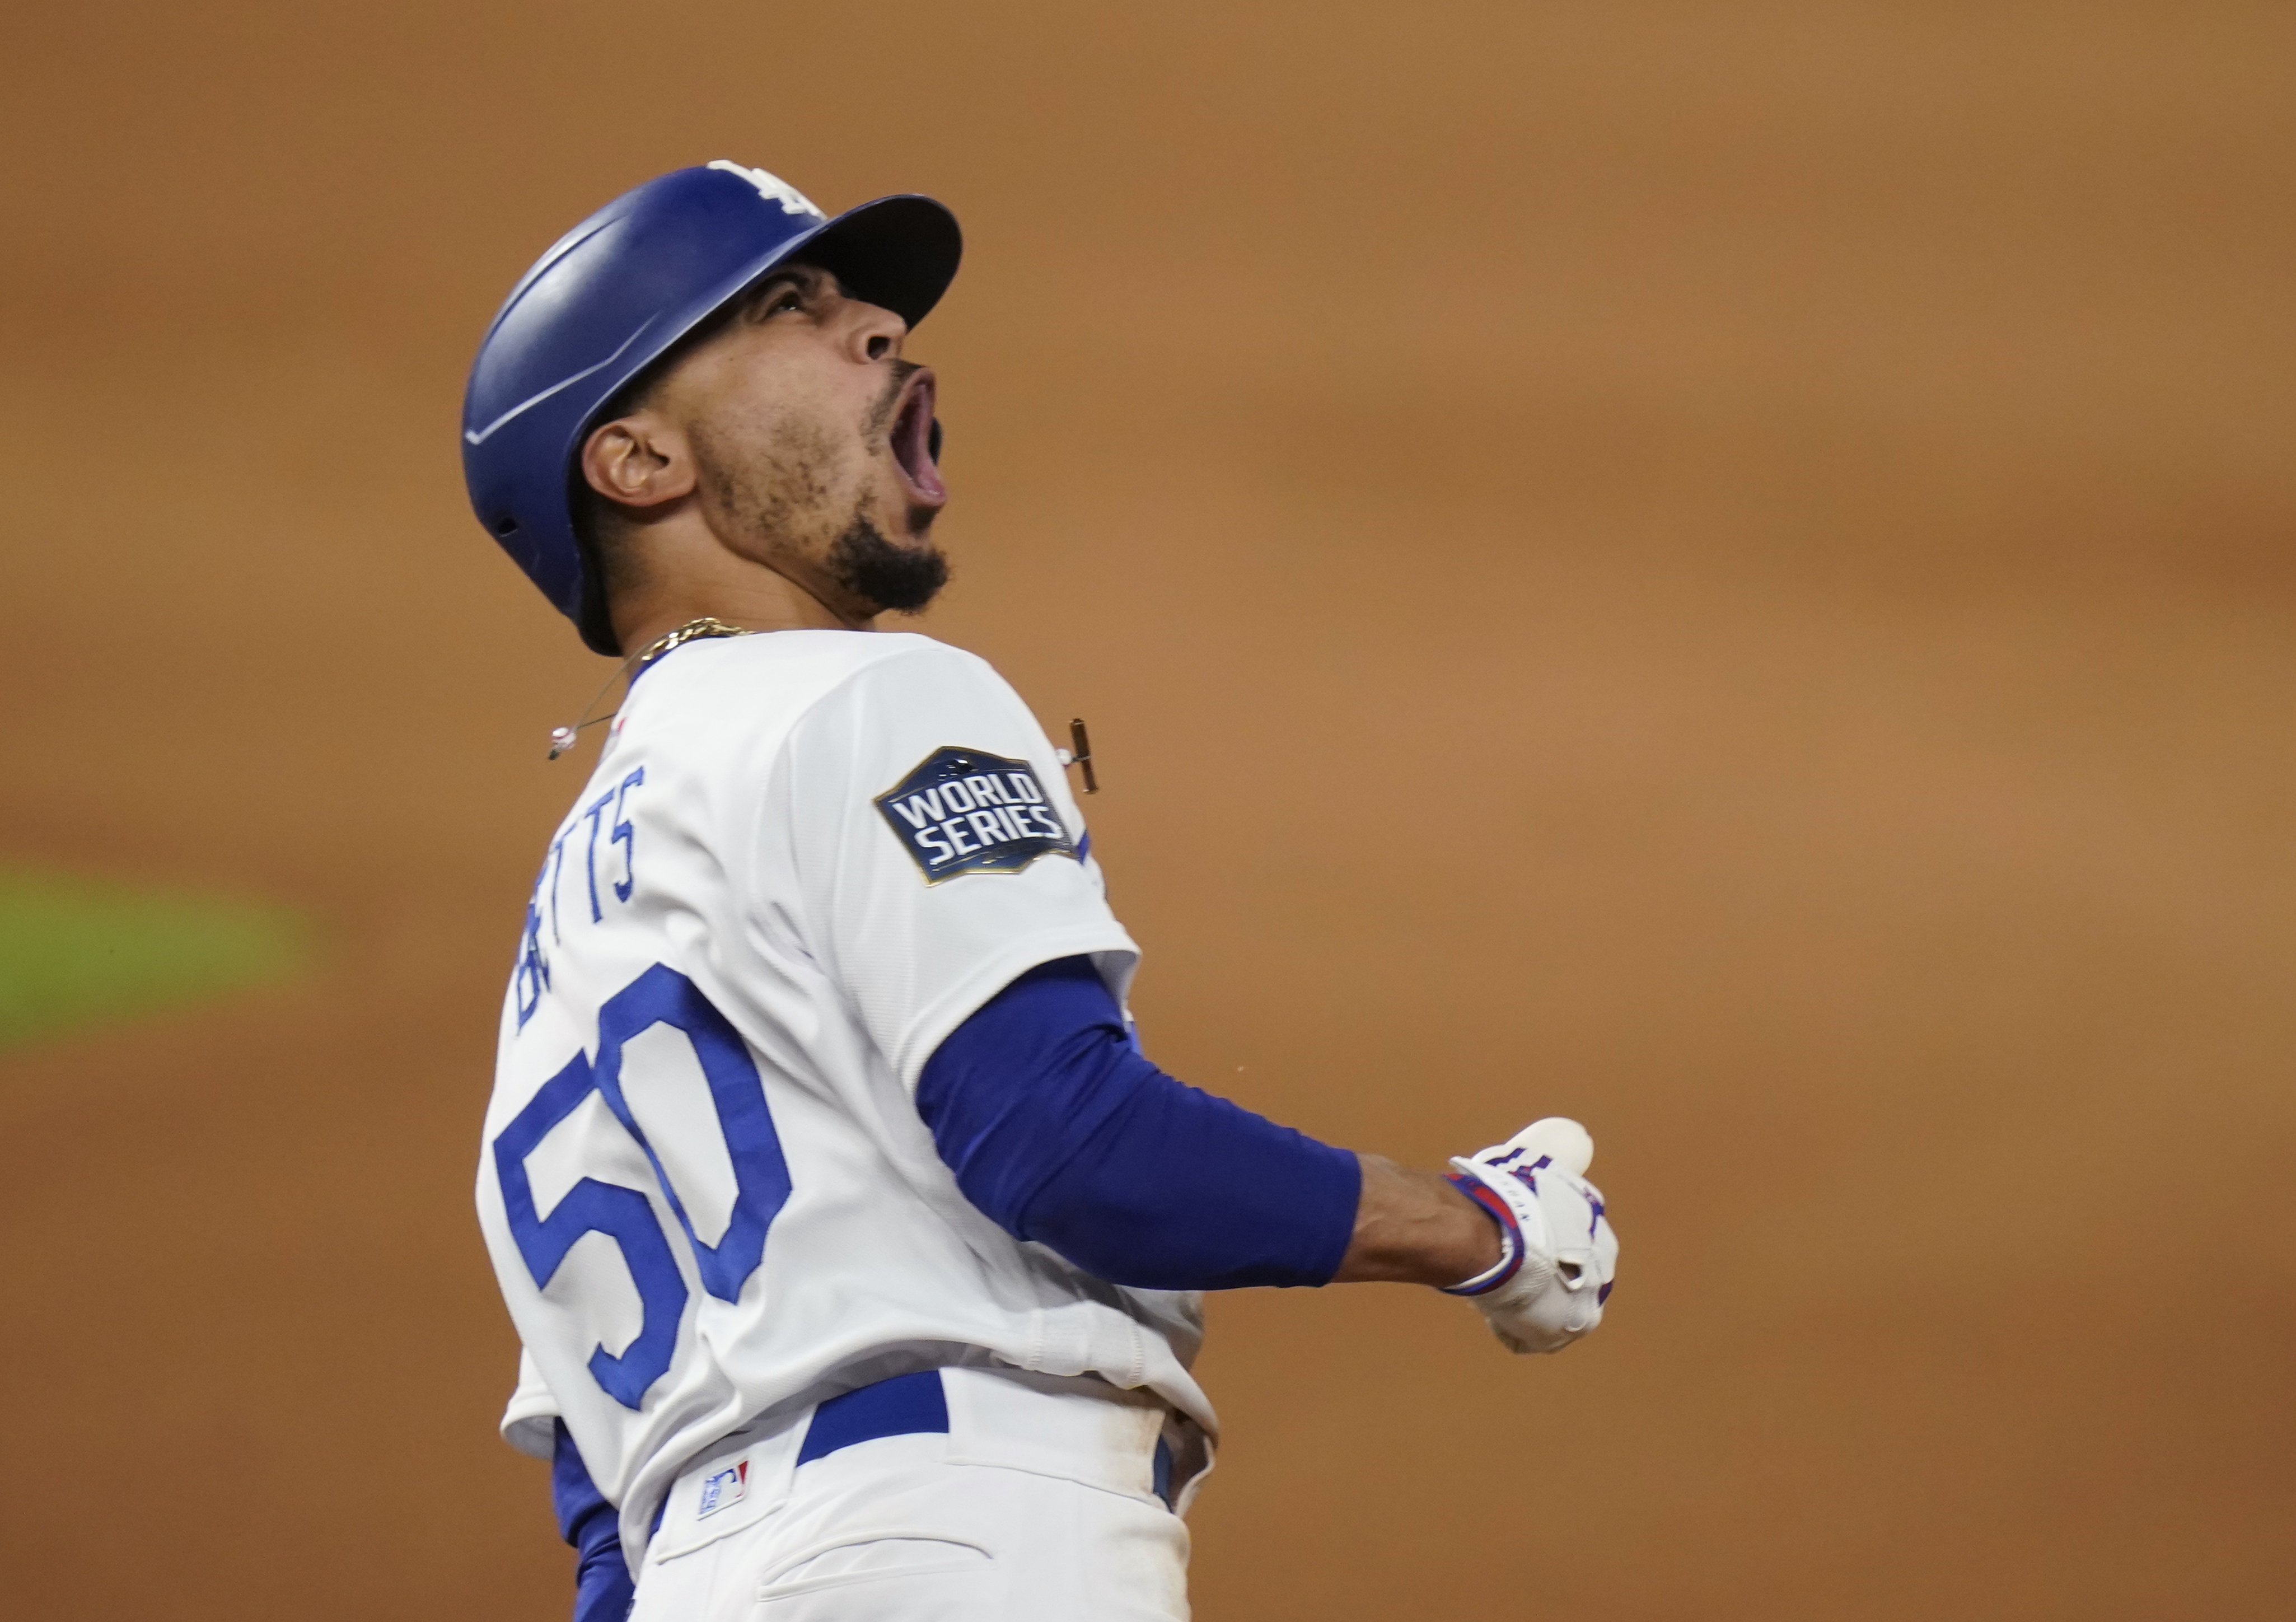 Los Angeles Dodgers win first World Series since 1988, beating